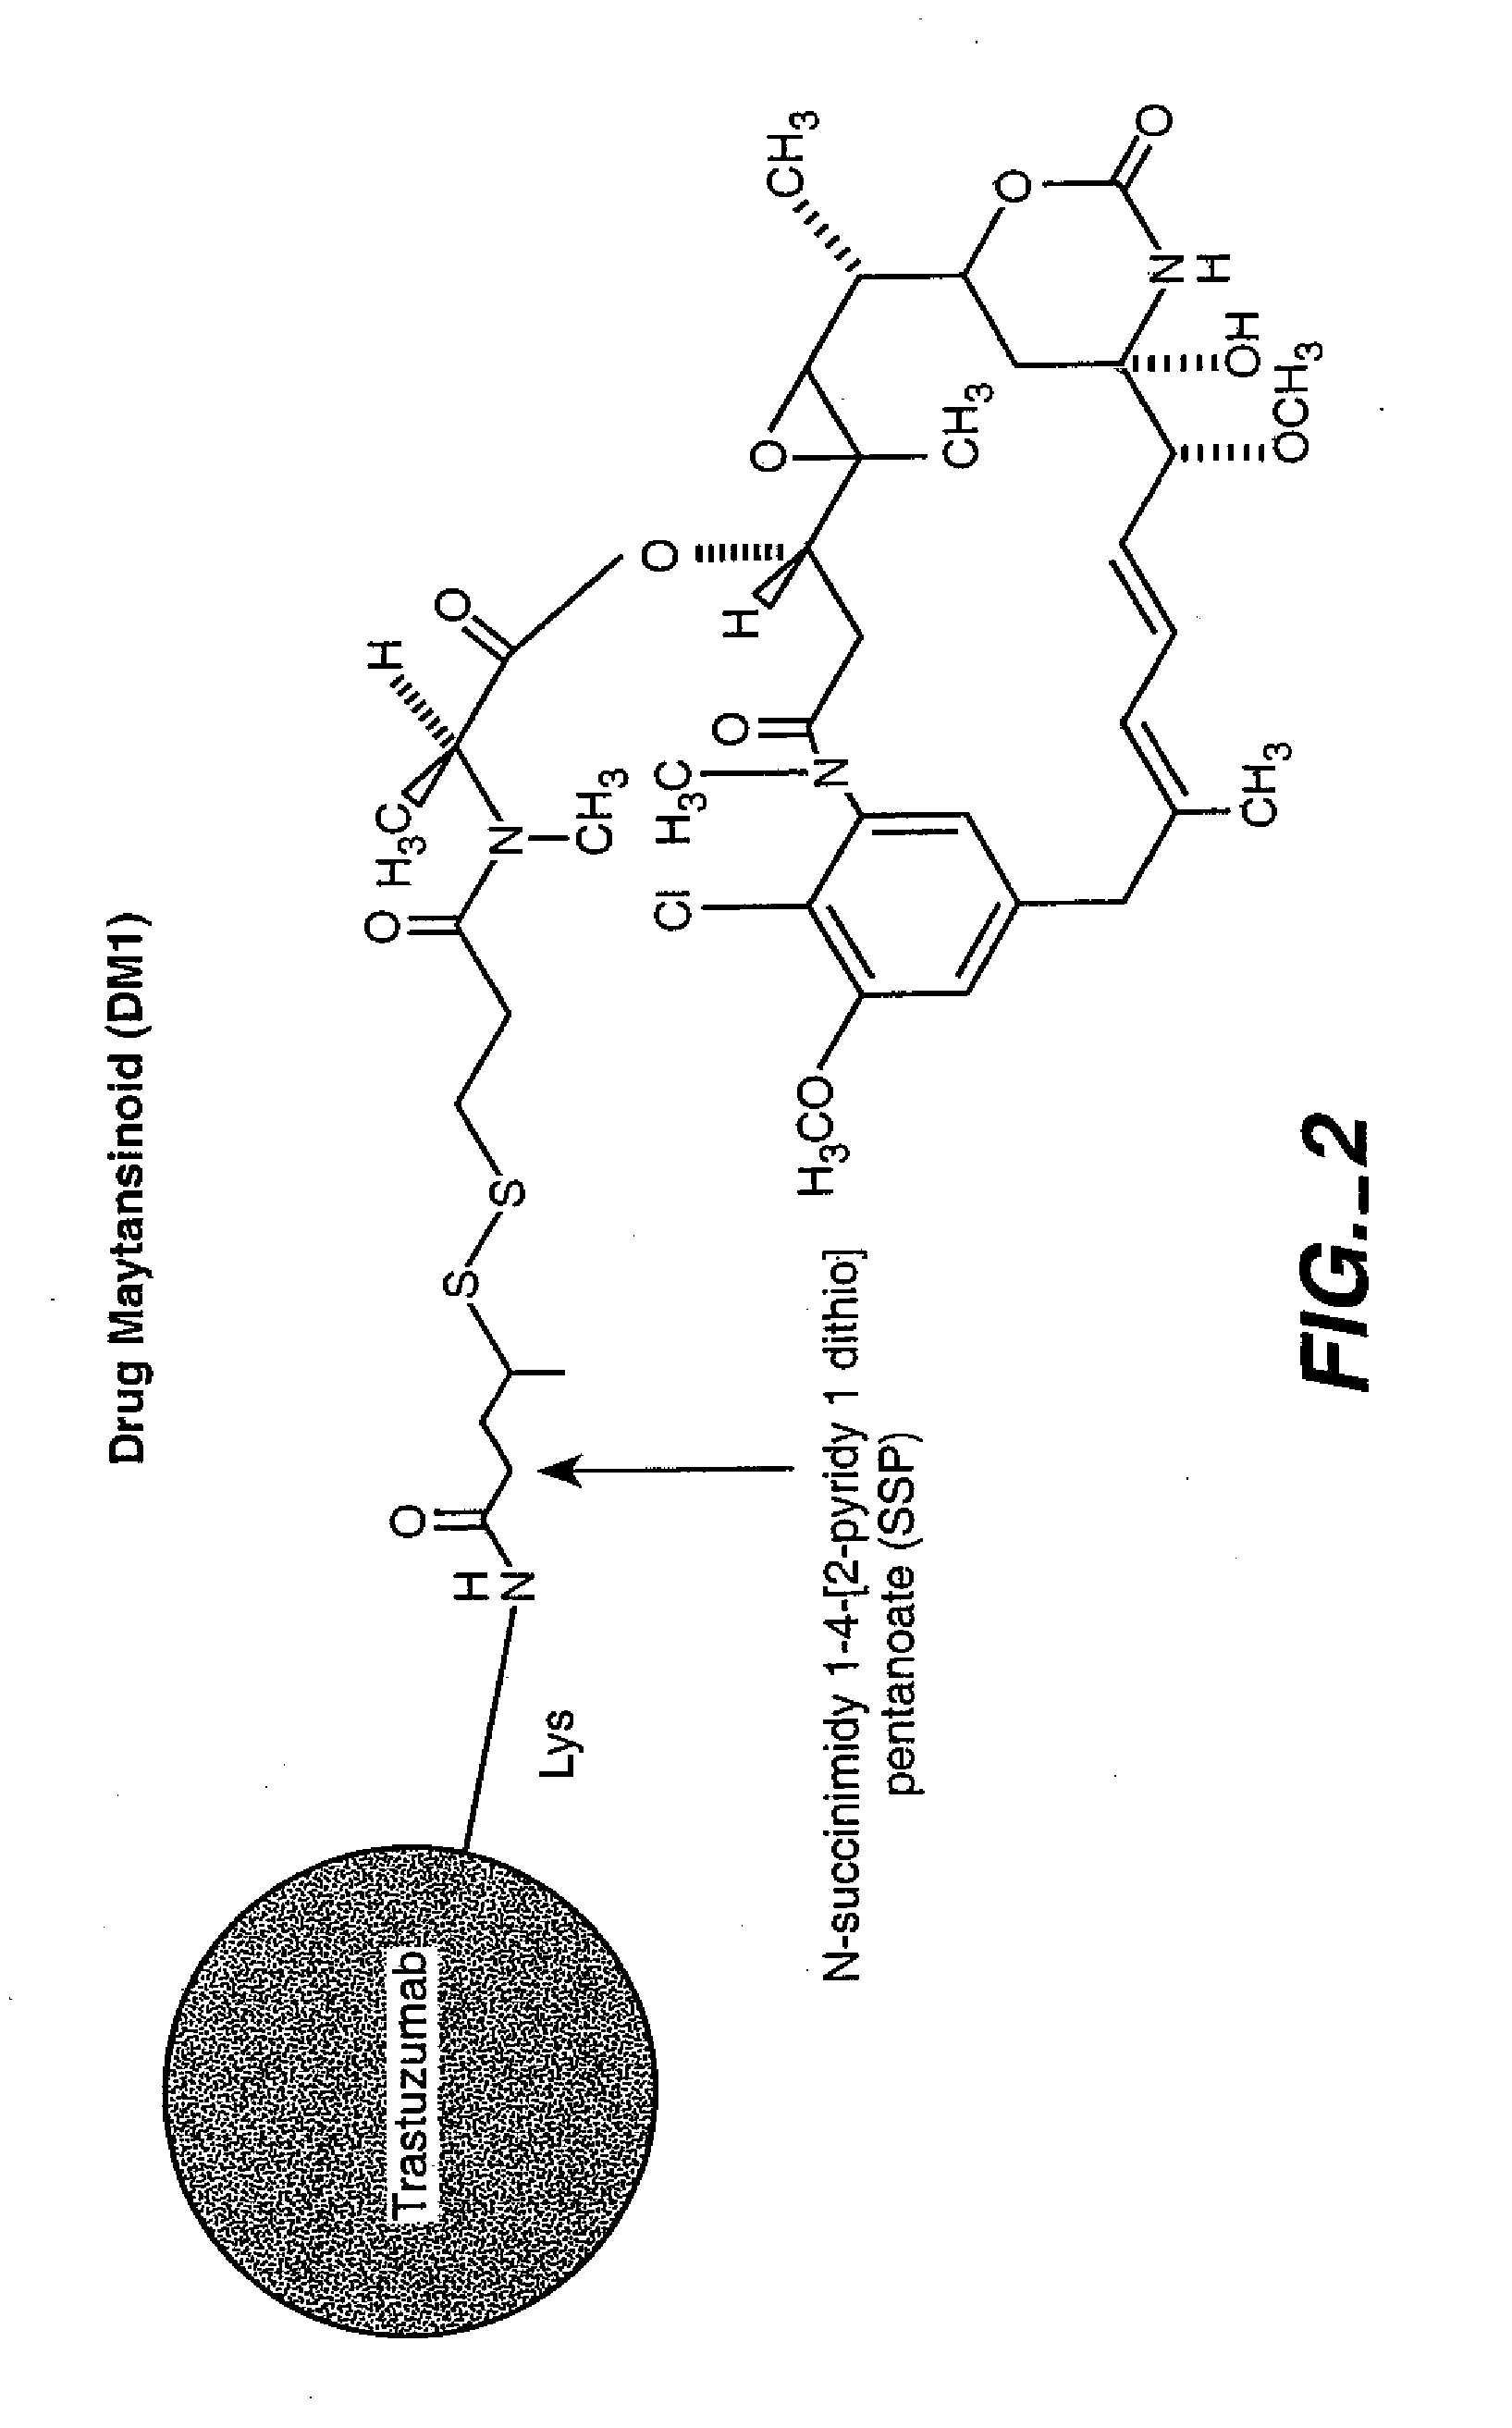 Methods for the identification of polypeptide antigens associated with disorders involving aberrant cell proliferation and compositions useful for the treatment of such disorders